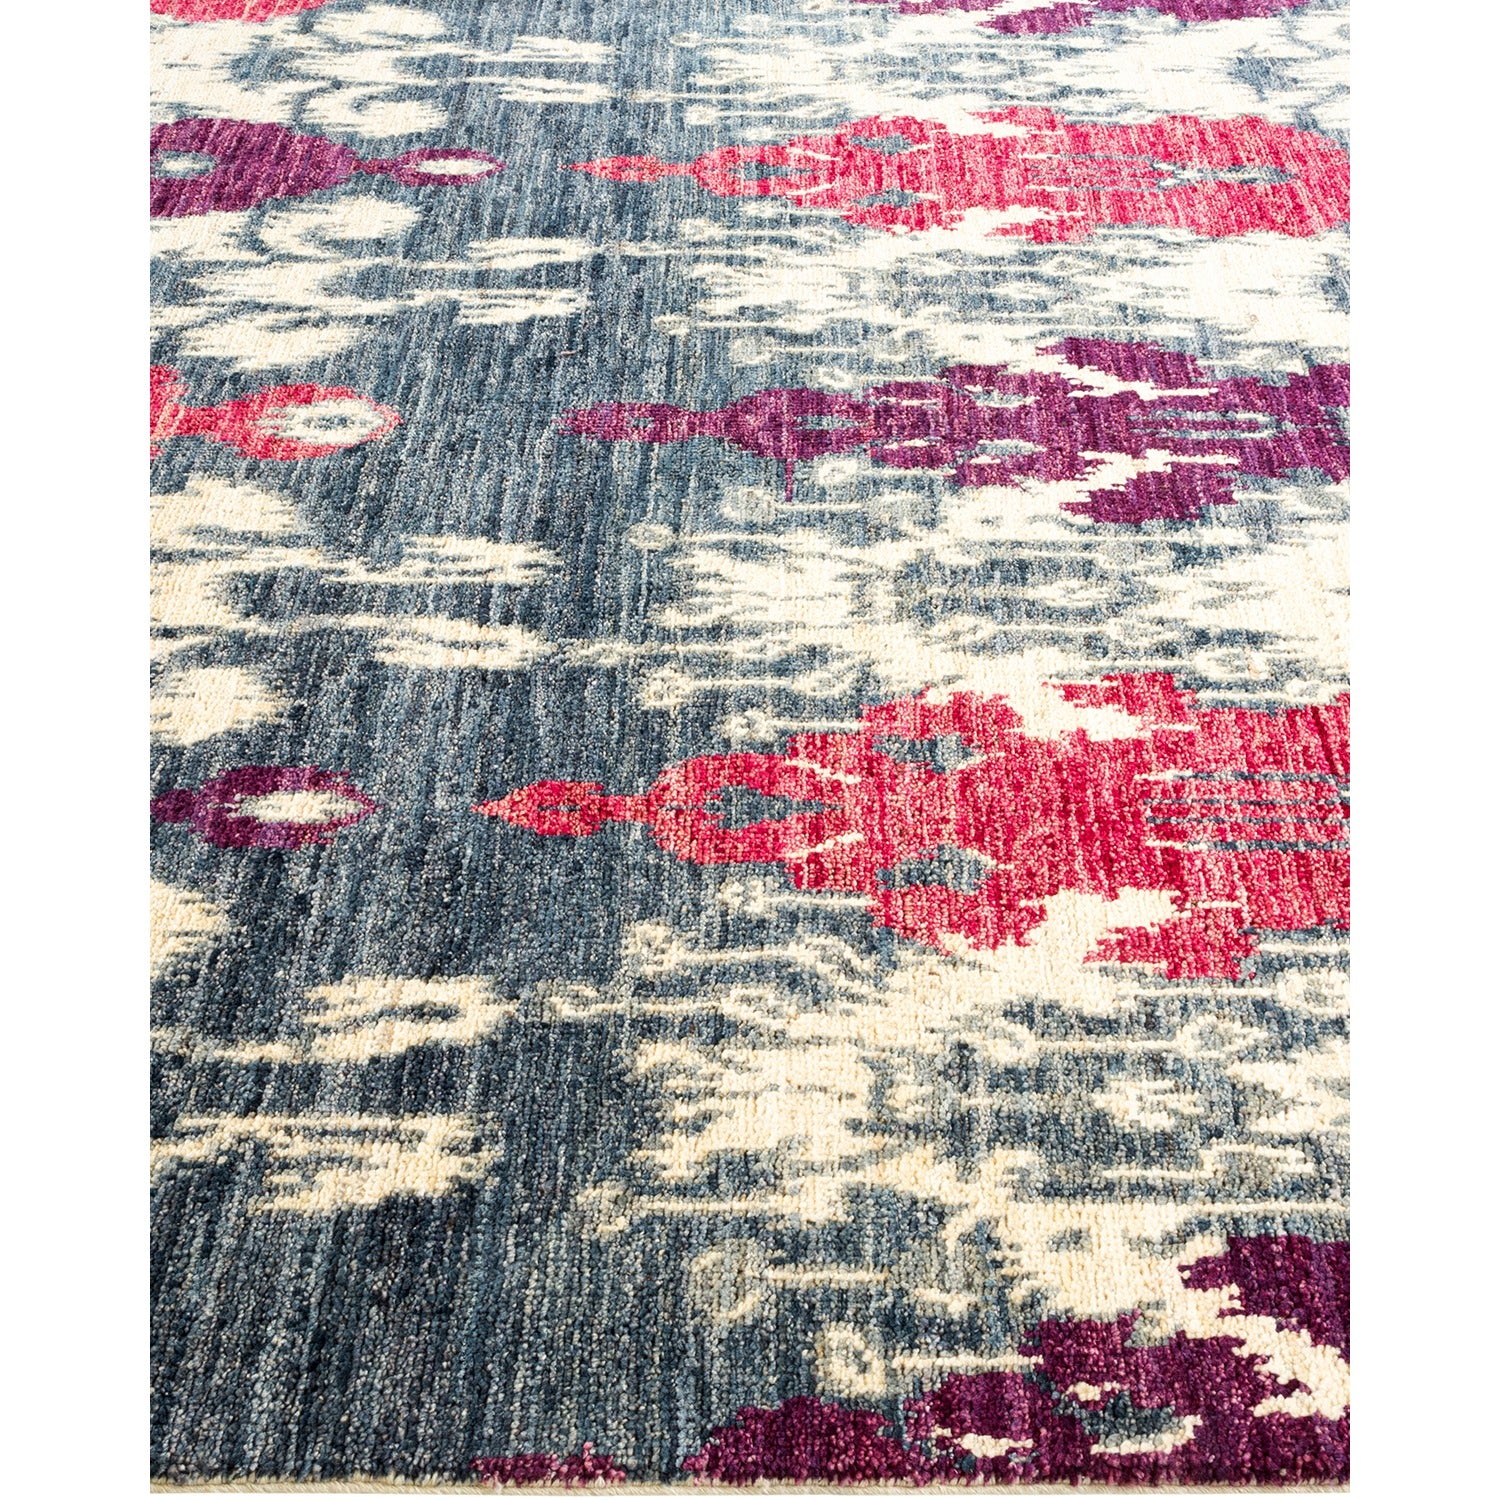 Vibrant multicolored abstract pattern on textured blue background of rug.